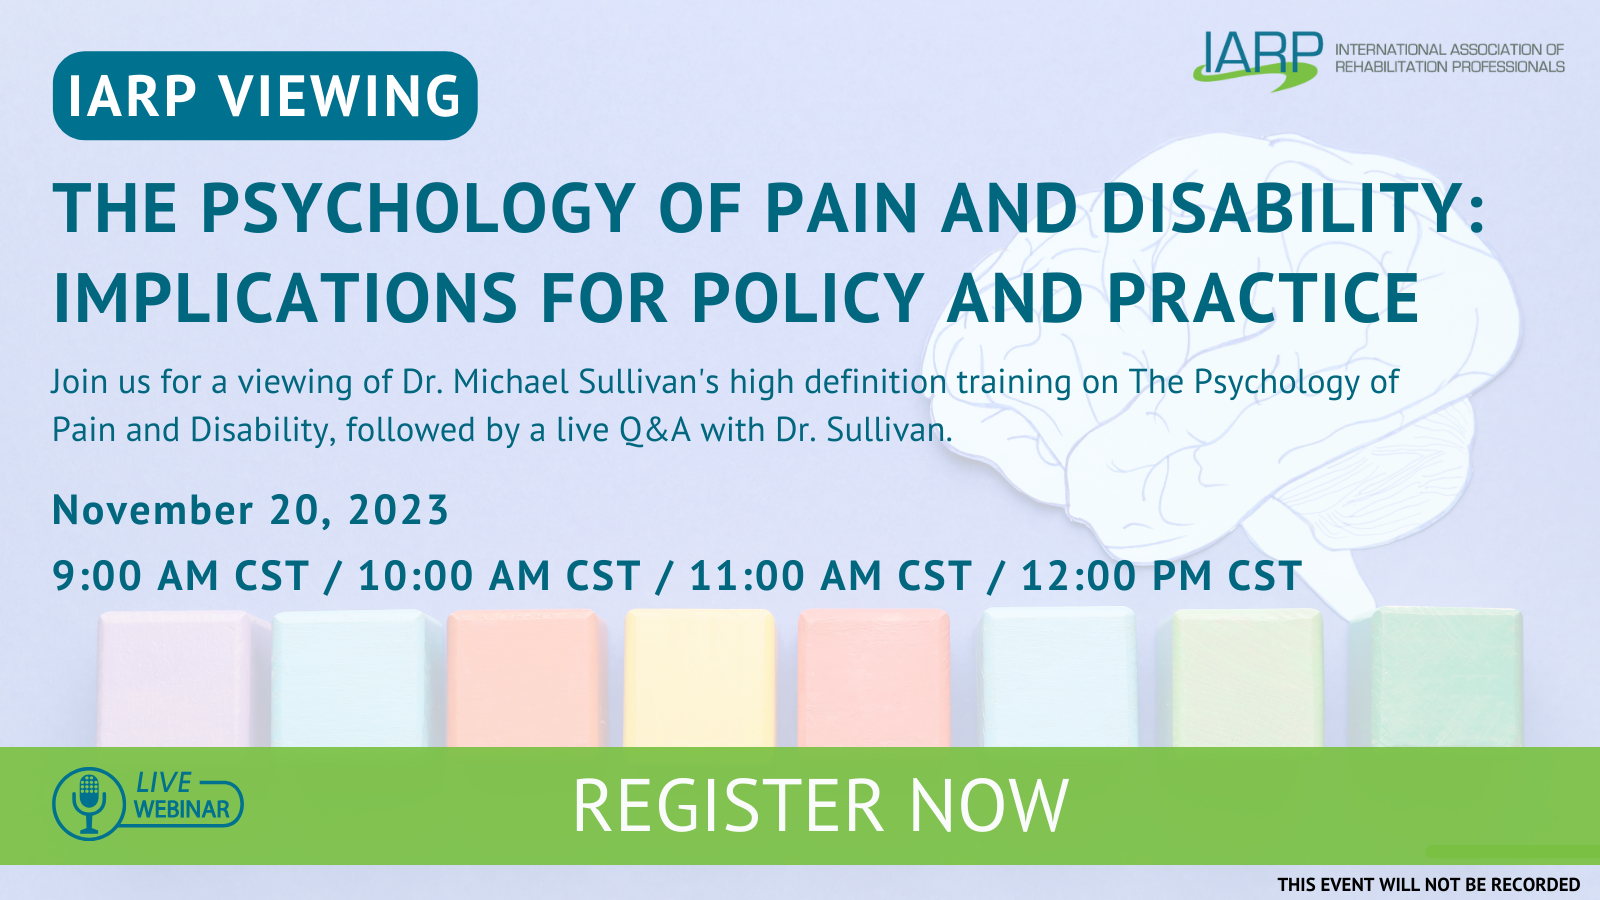 Upcoming Webinar: Viewing: The Psychology of Pain and Disability: Implications for Policy and Practice